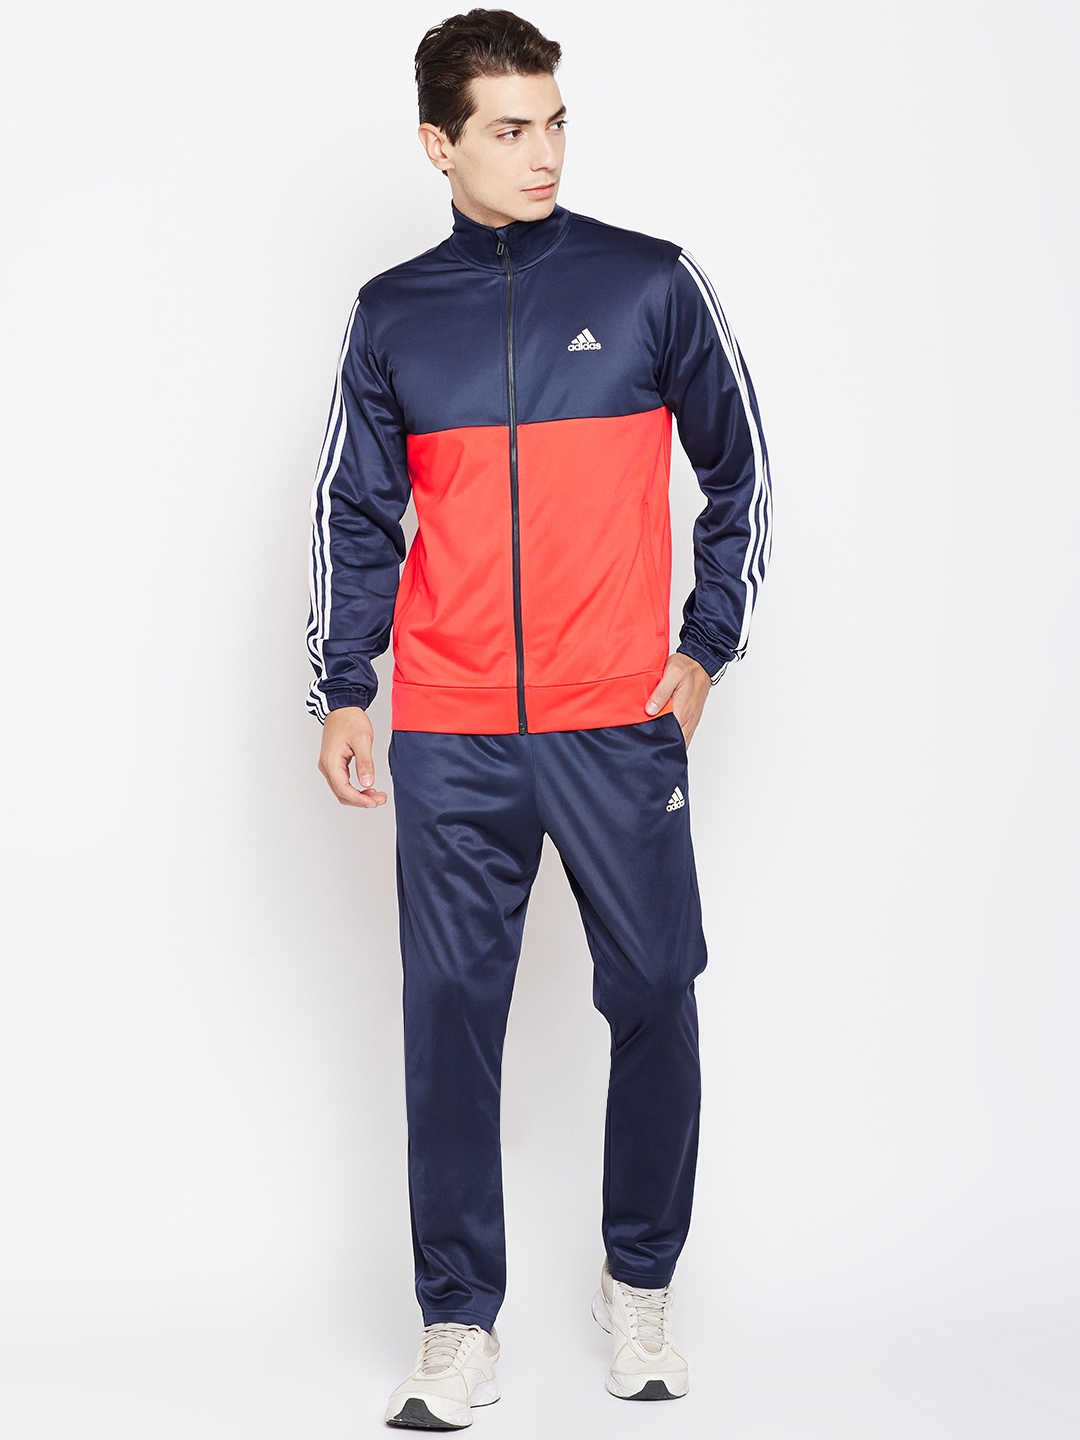 Buy ADIDAS Navy & Red BACK2BAS Tracksuit - Tracksuits for Men 3888663 | Myntra